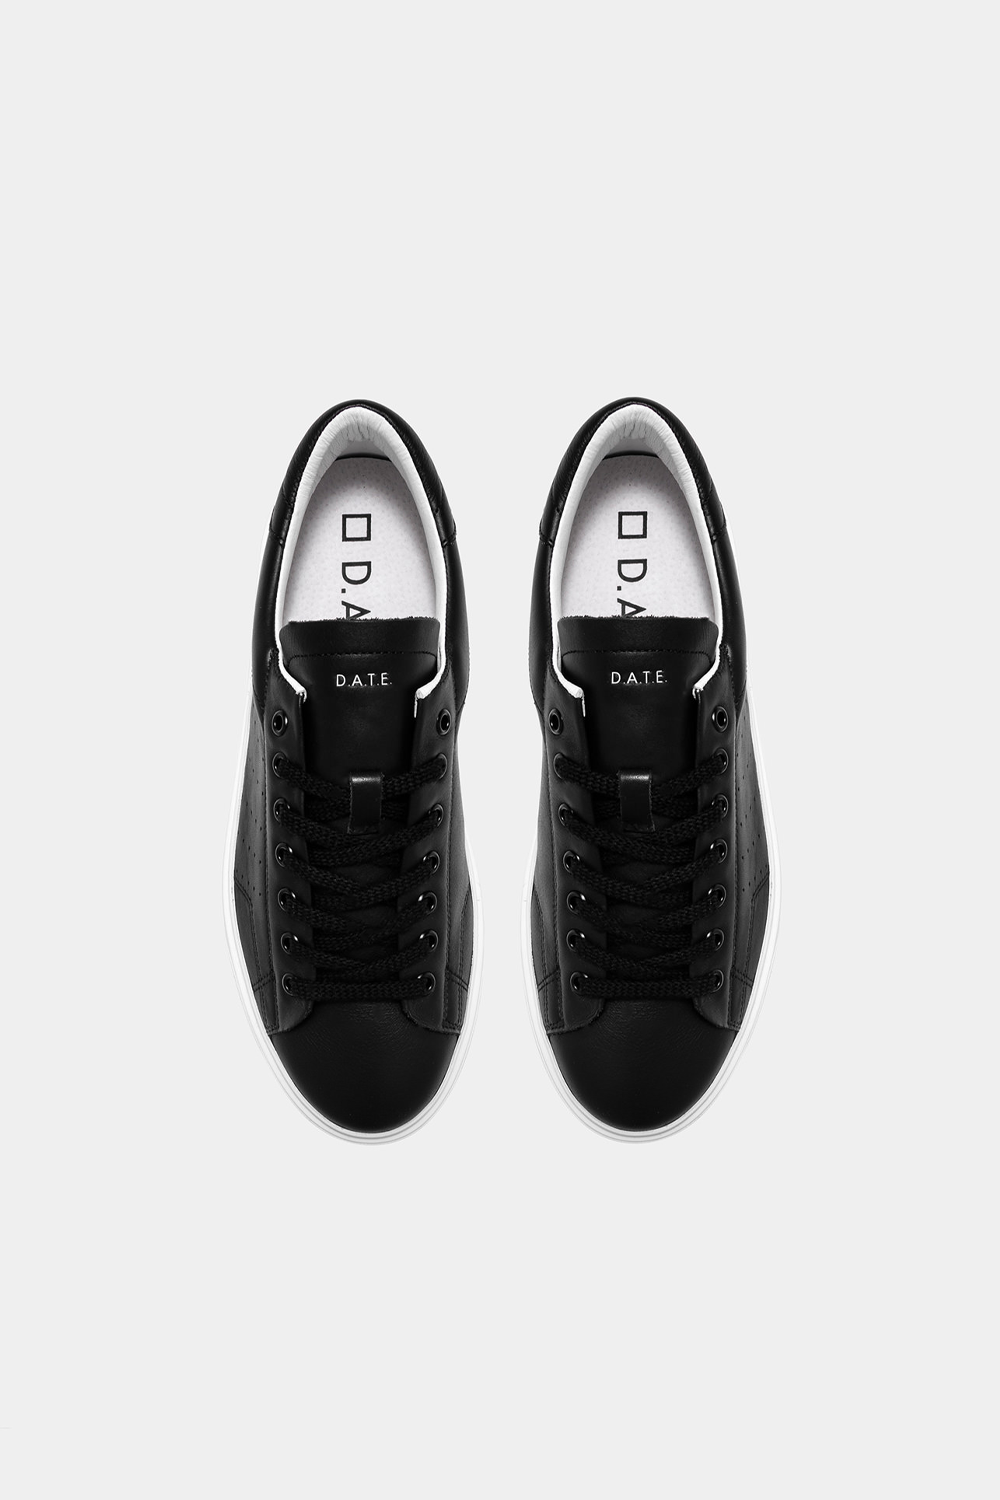 Buy the D.A.T.E. Levante Calf Sneaker in Black at Intro. Spend £50 for free UK delivery. Official stockists. We ship worldwide.